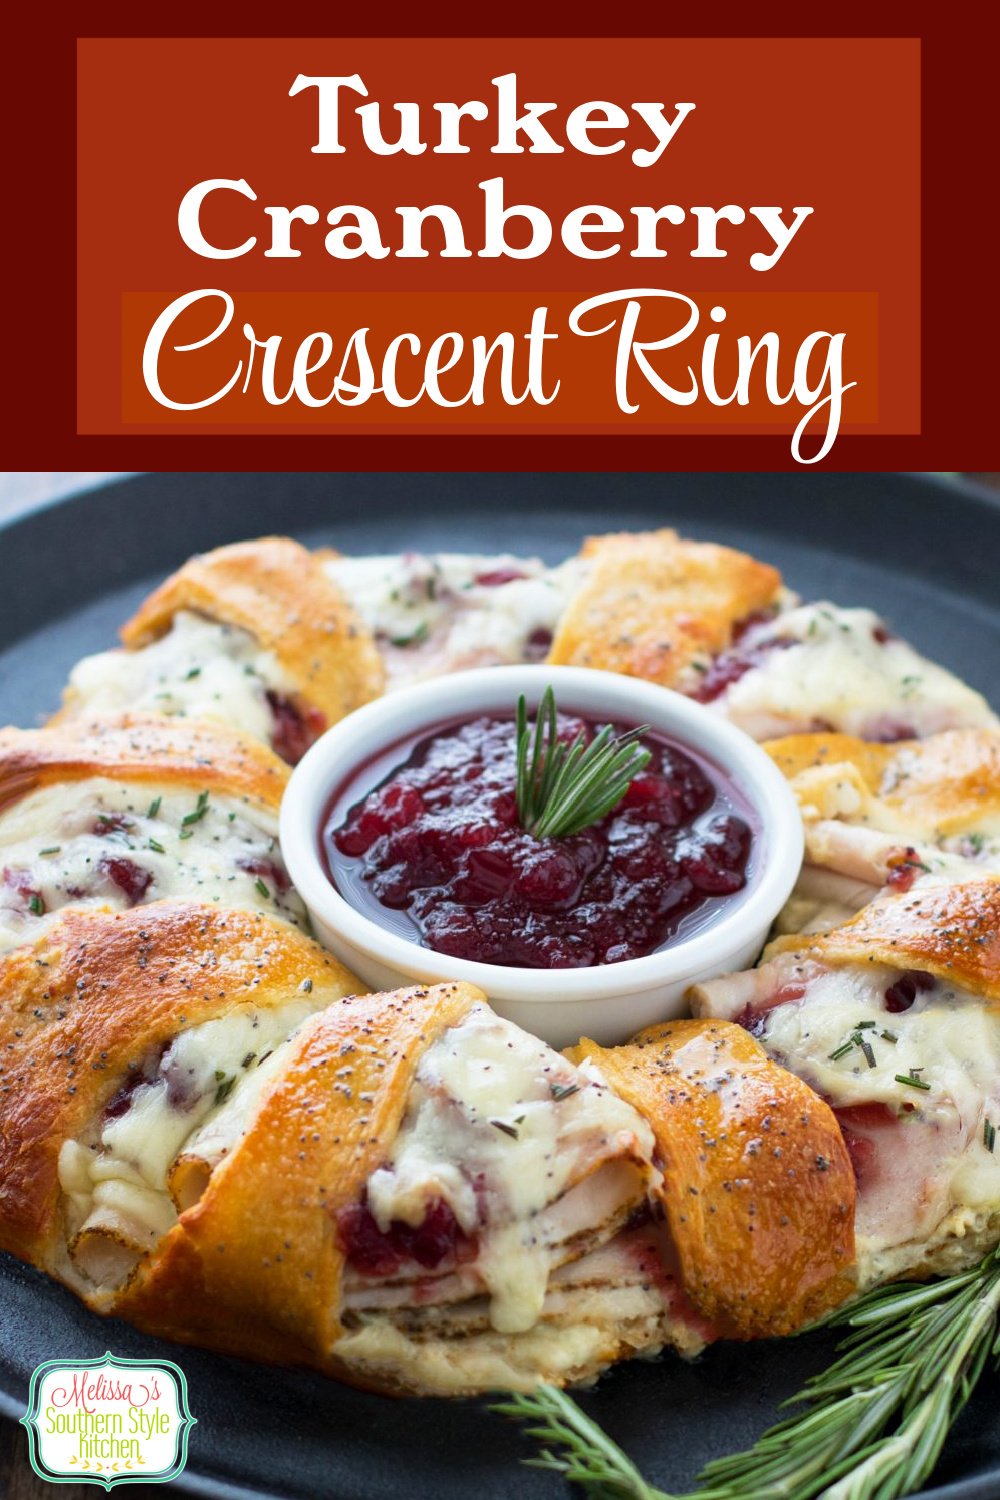 Turn leftover turkey or deli turkey into a rock star snack with this Turkey Cranberry Crescent Ring #turkey #leftoverturkey #crescentrolls #turkeycrescentring #thanksgiving #fallbaking #appetizers #christmas #southernfood #southernrecipes #cranberrysauce